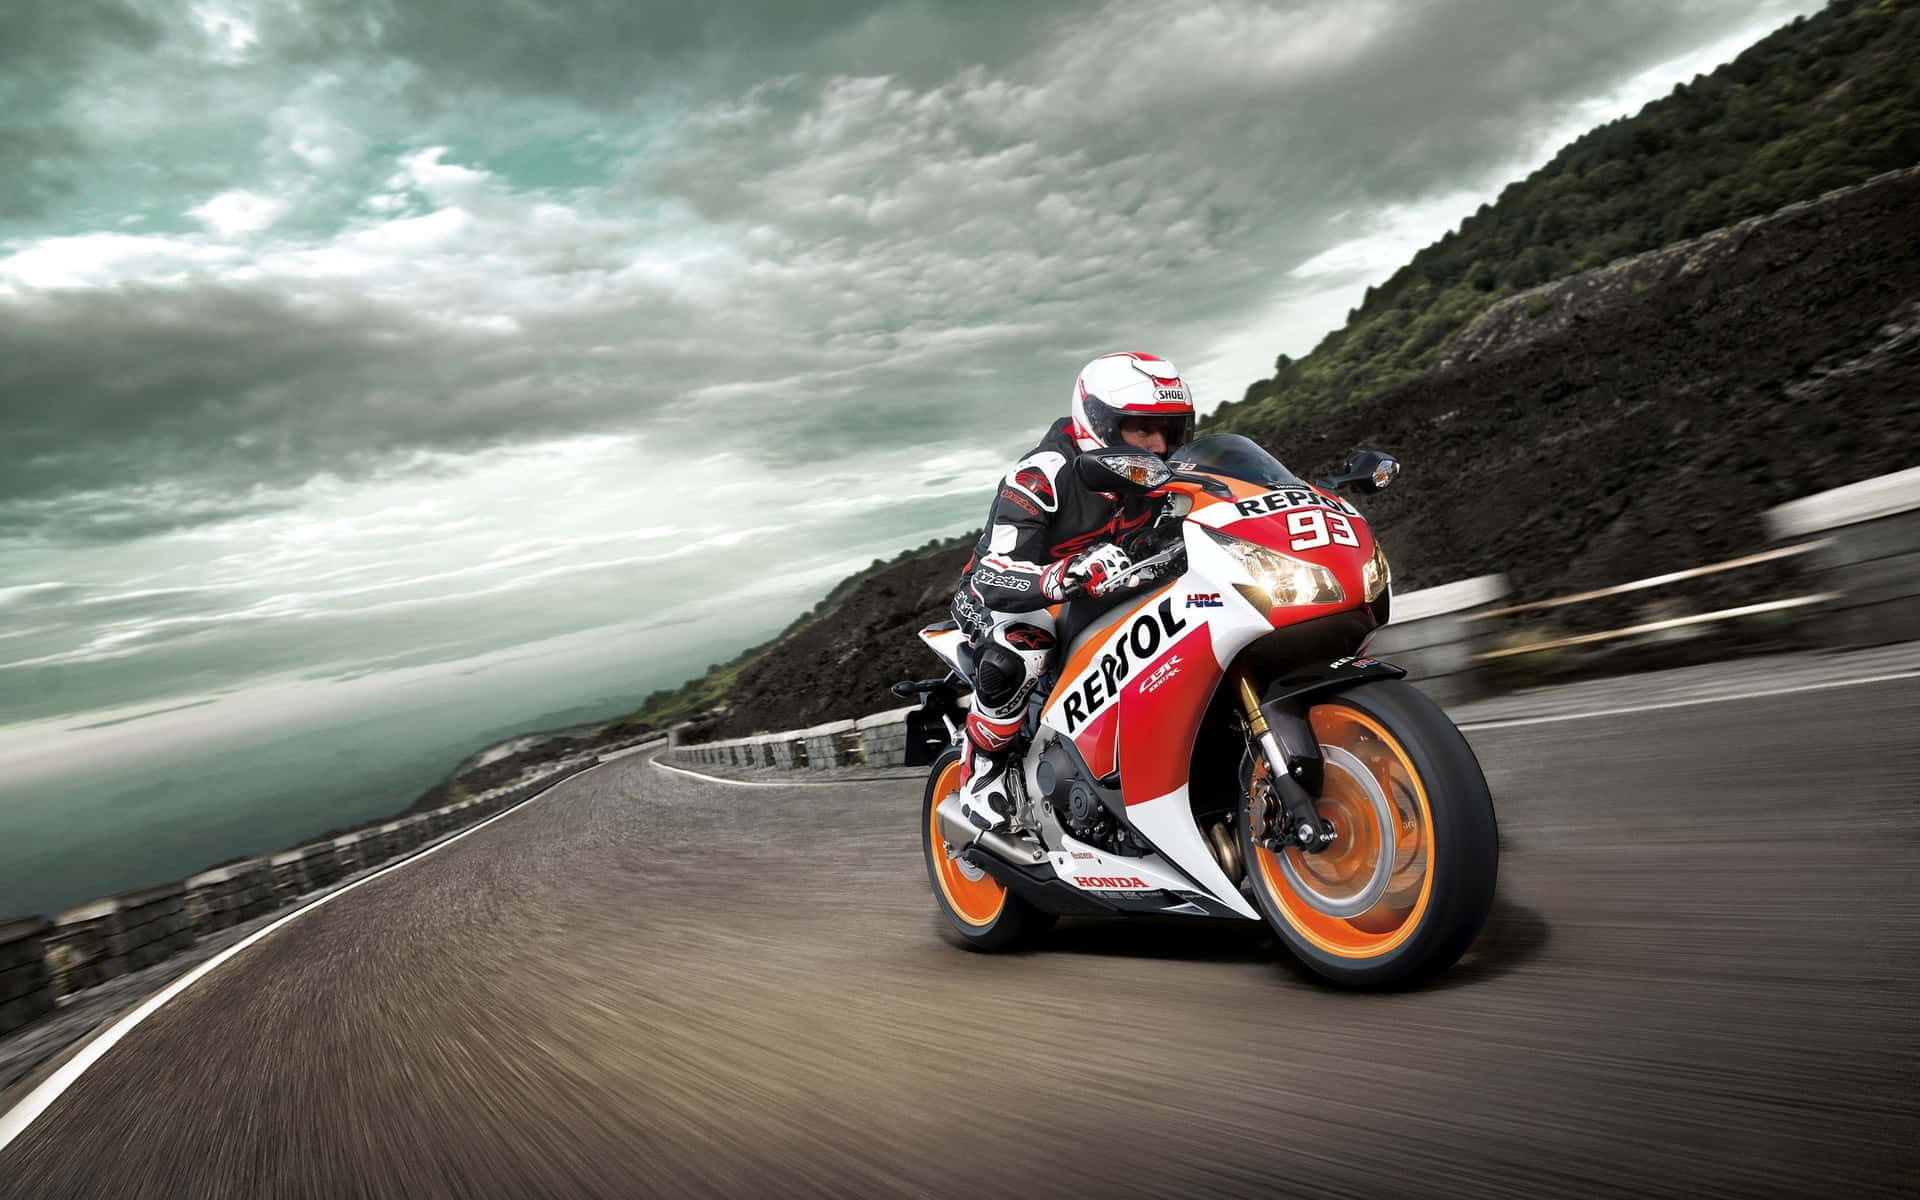 Caption: Conquering The Road With Honda Motorcycle Wallpaper